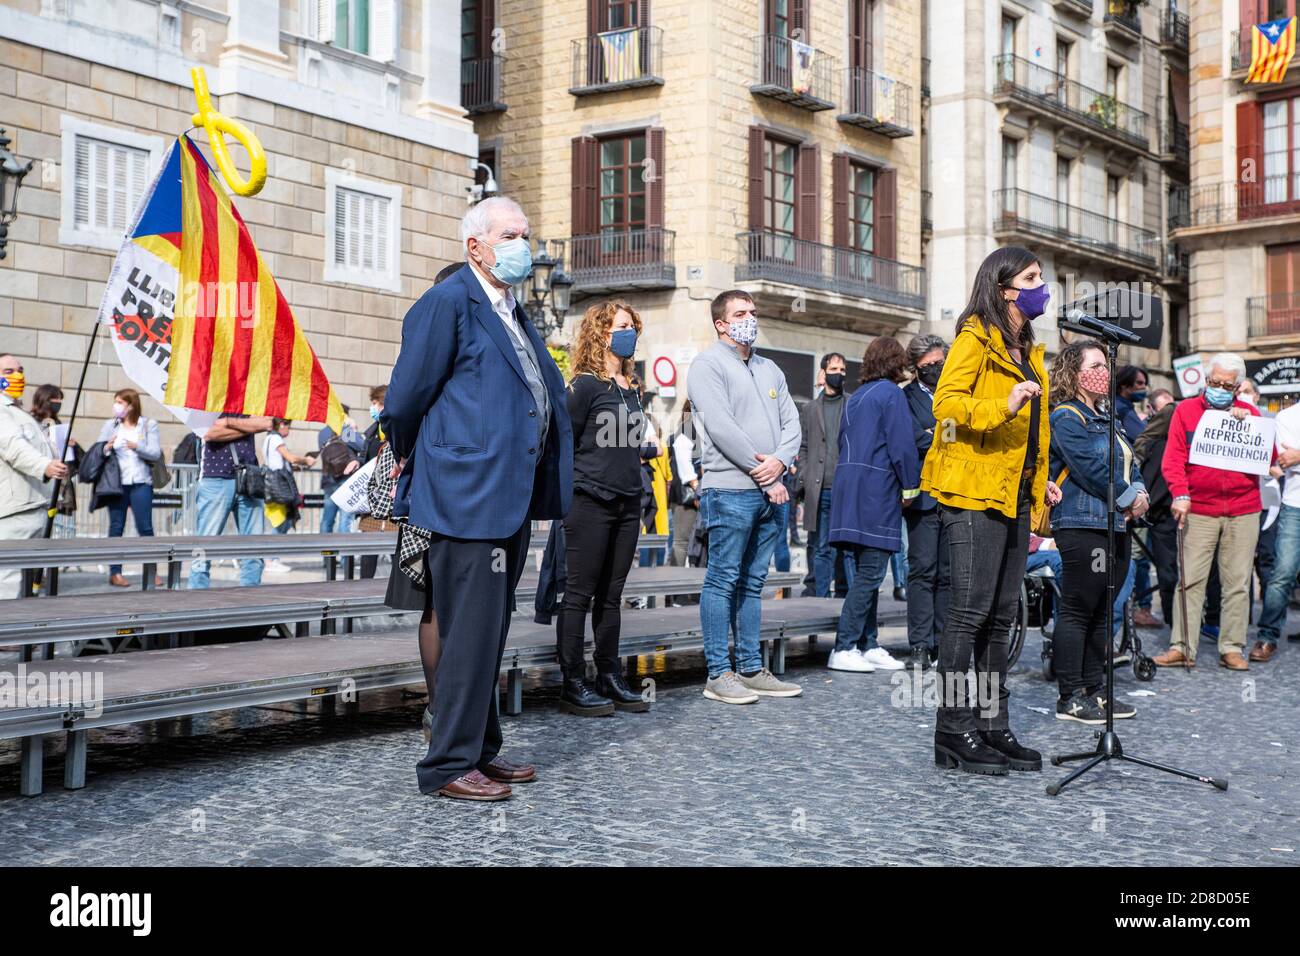 Barcelona, Spain. 2020.10.28. Some Pro-independence Political parties and Entities gather in the Sant Jaume square. Stock Photo